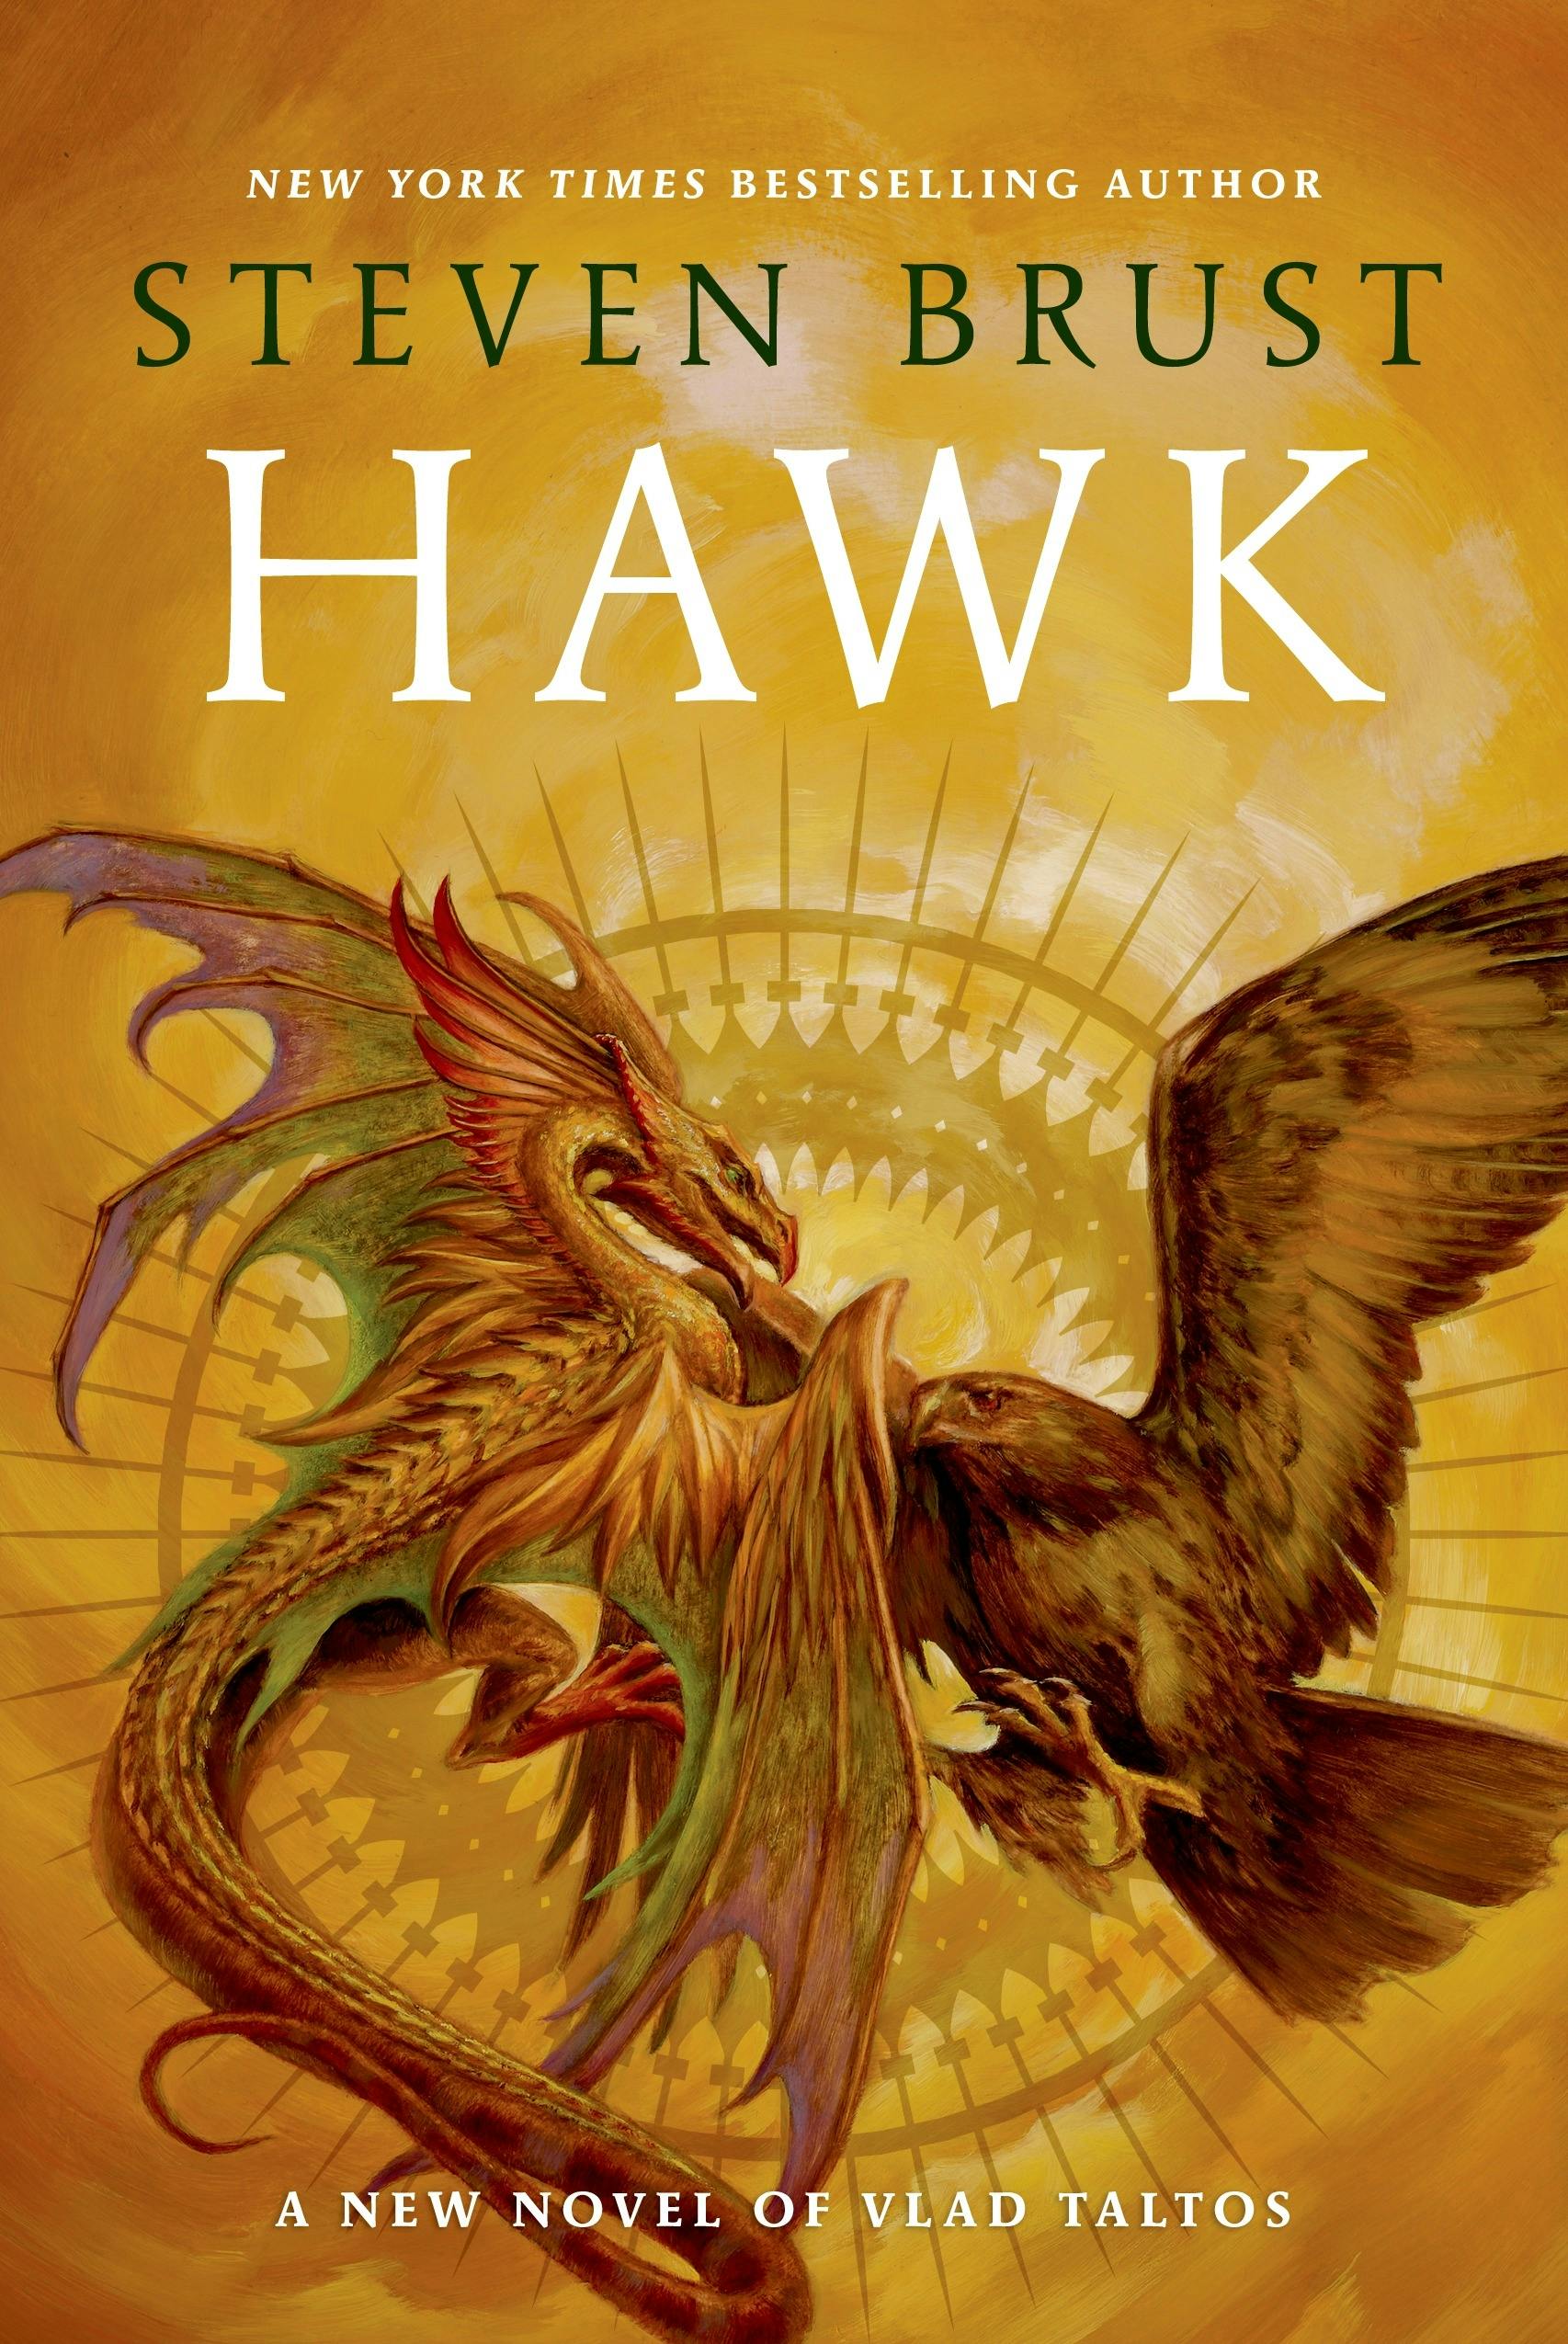 Cover for the book titled as: Hawk